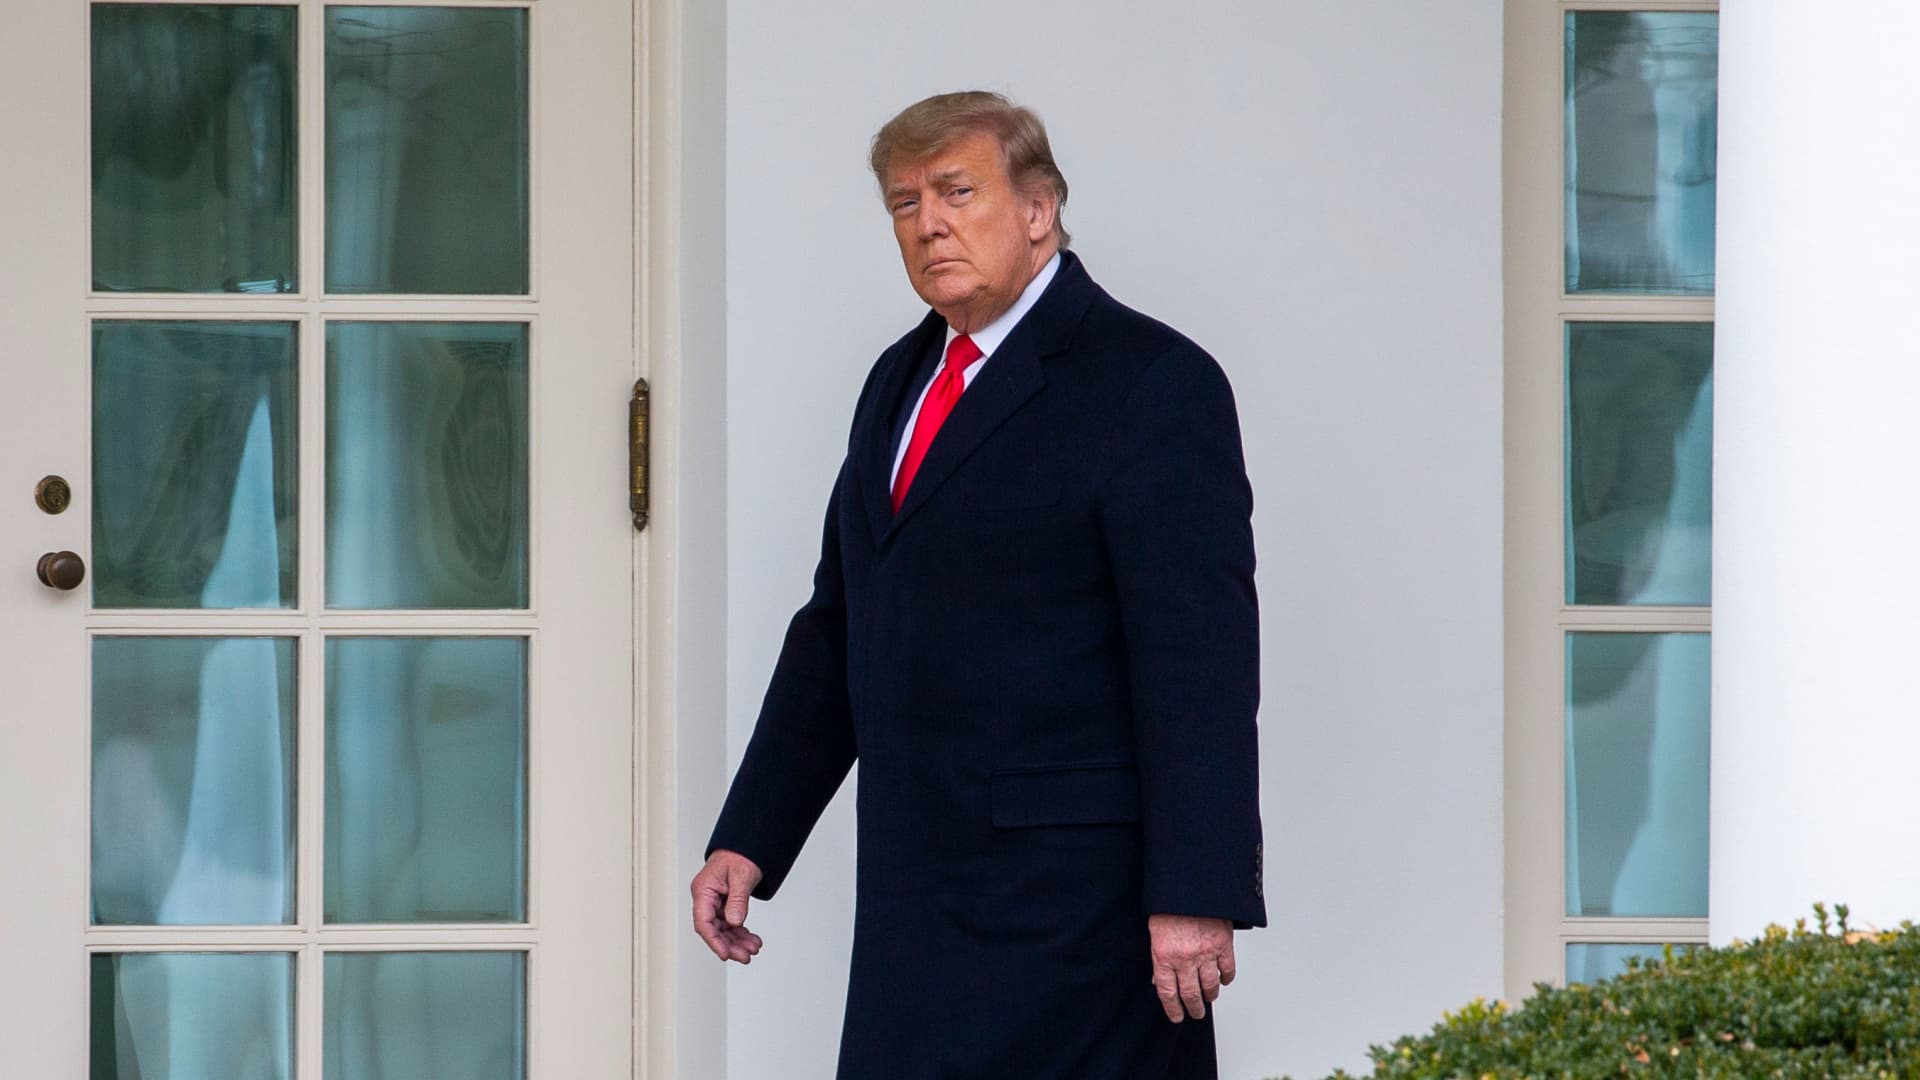 U.S. President Donald Trump walks to the Oval Office while arriving back at the White House on December 31, 2020 in Washington, DC.